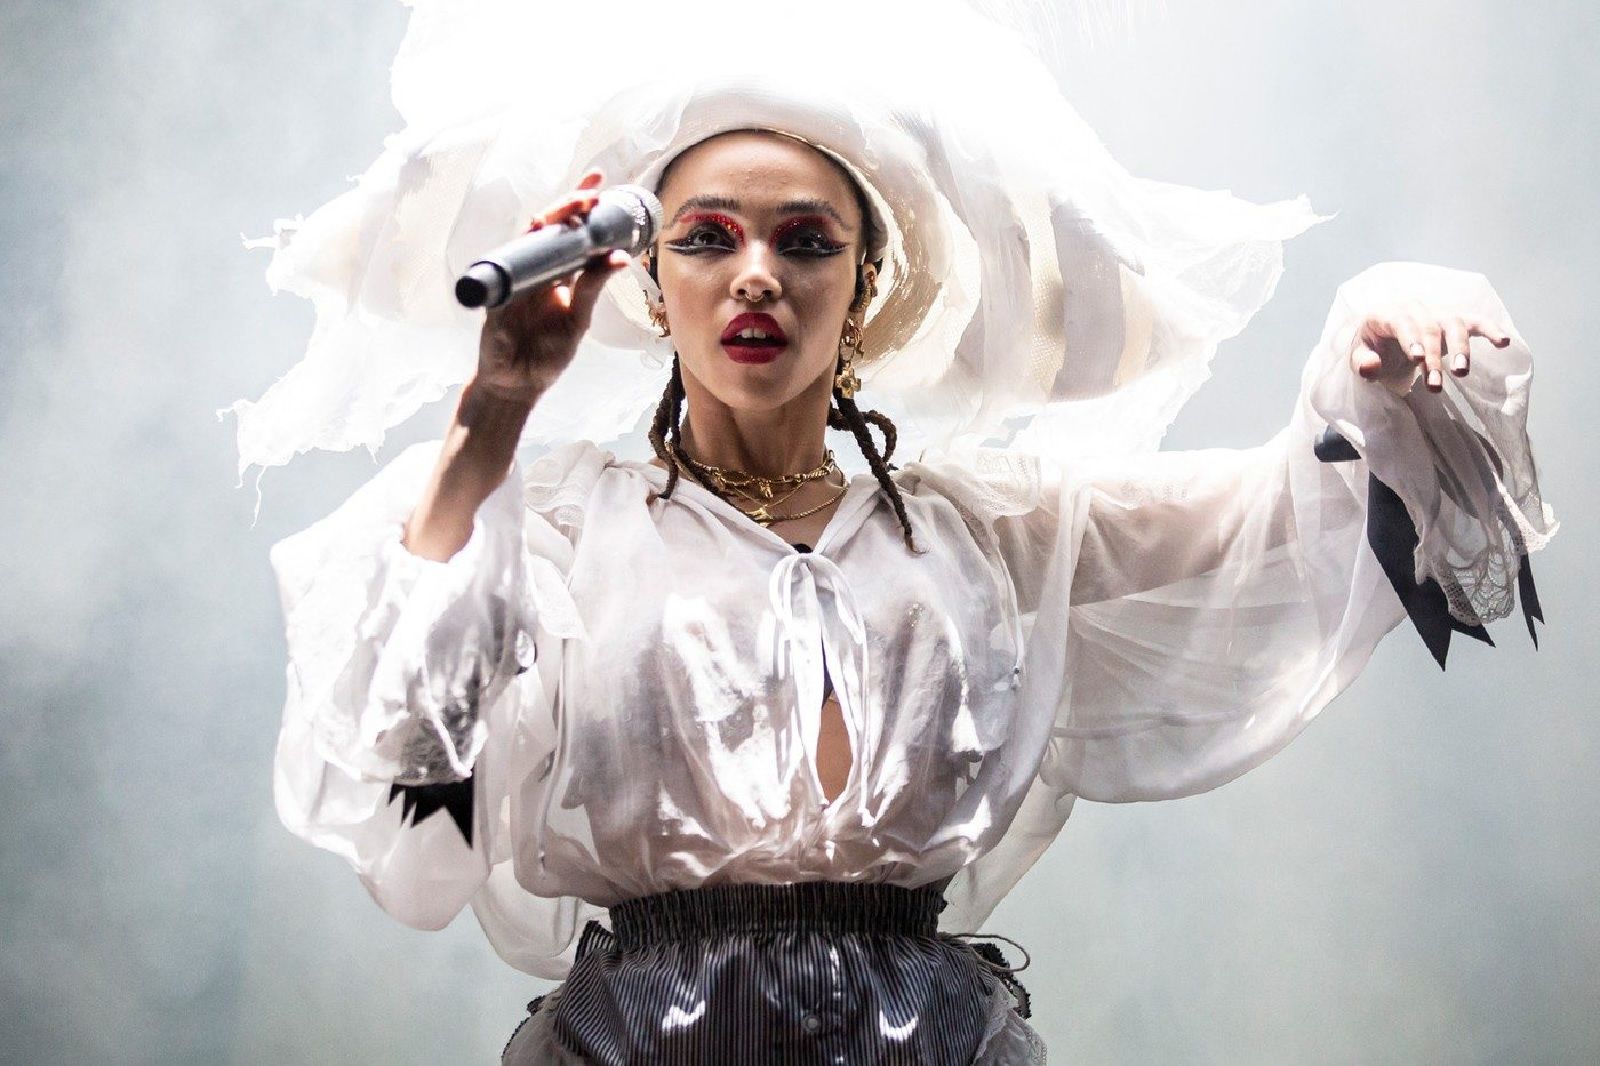 The Italian date of FKA Twigs' tour Tickets for Milan concert are available on the DICE app